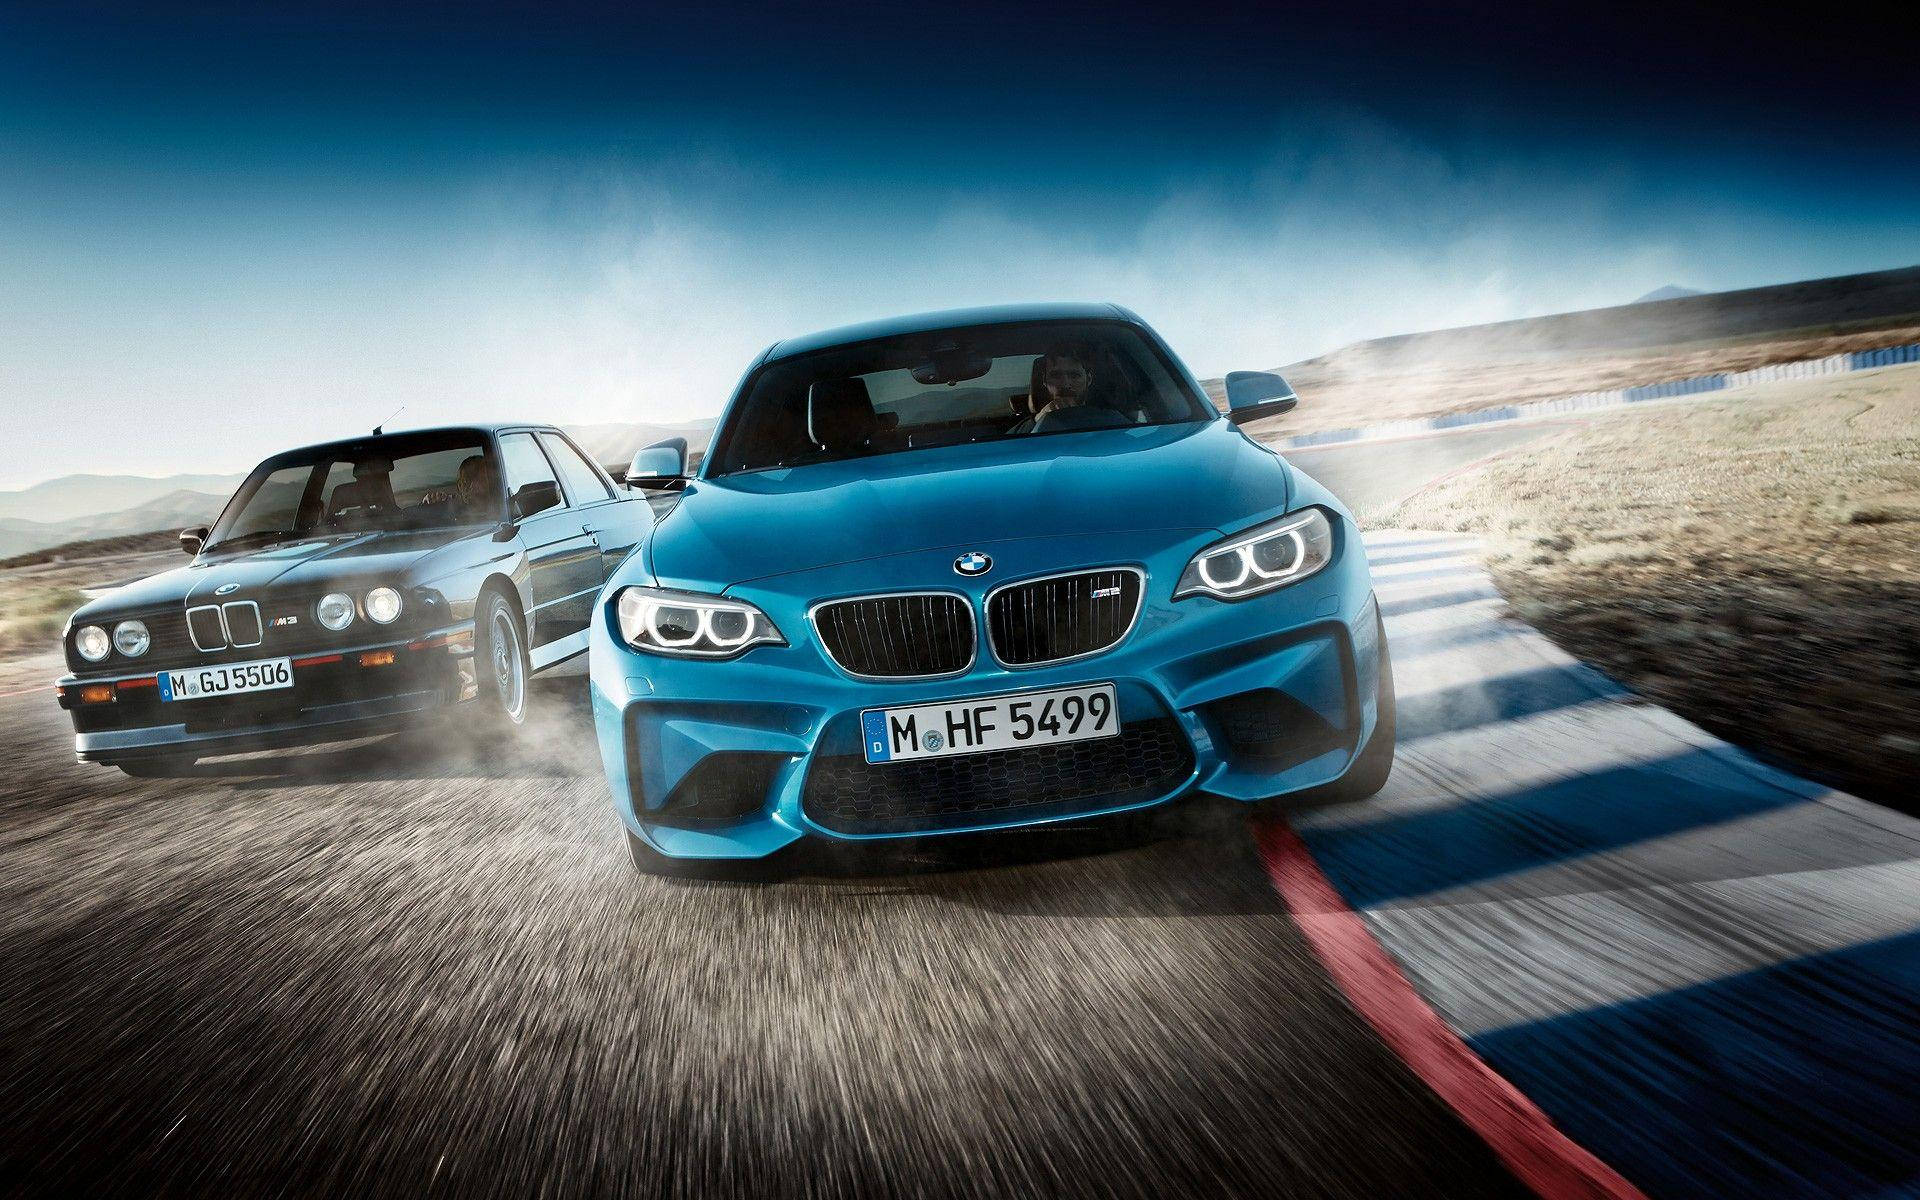 Blue Bmw Cars On Race Track Wallpaper